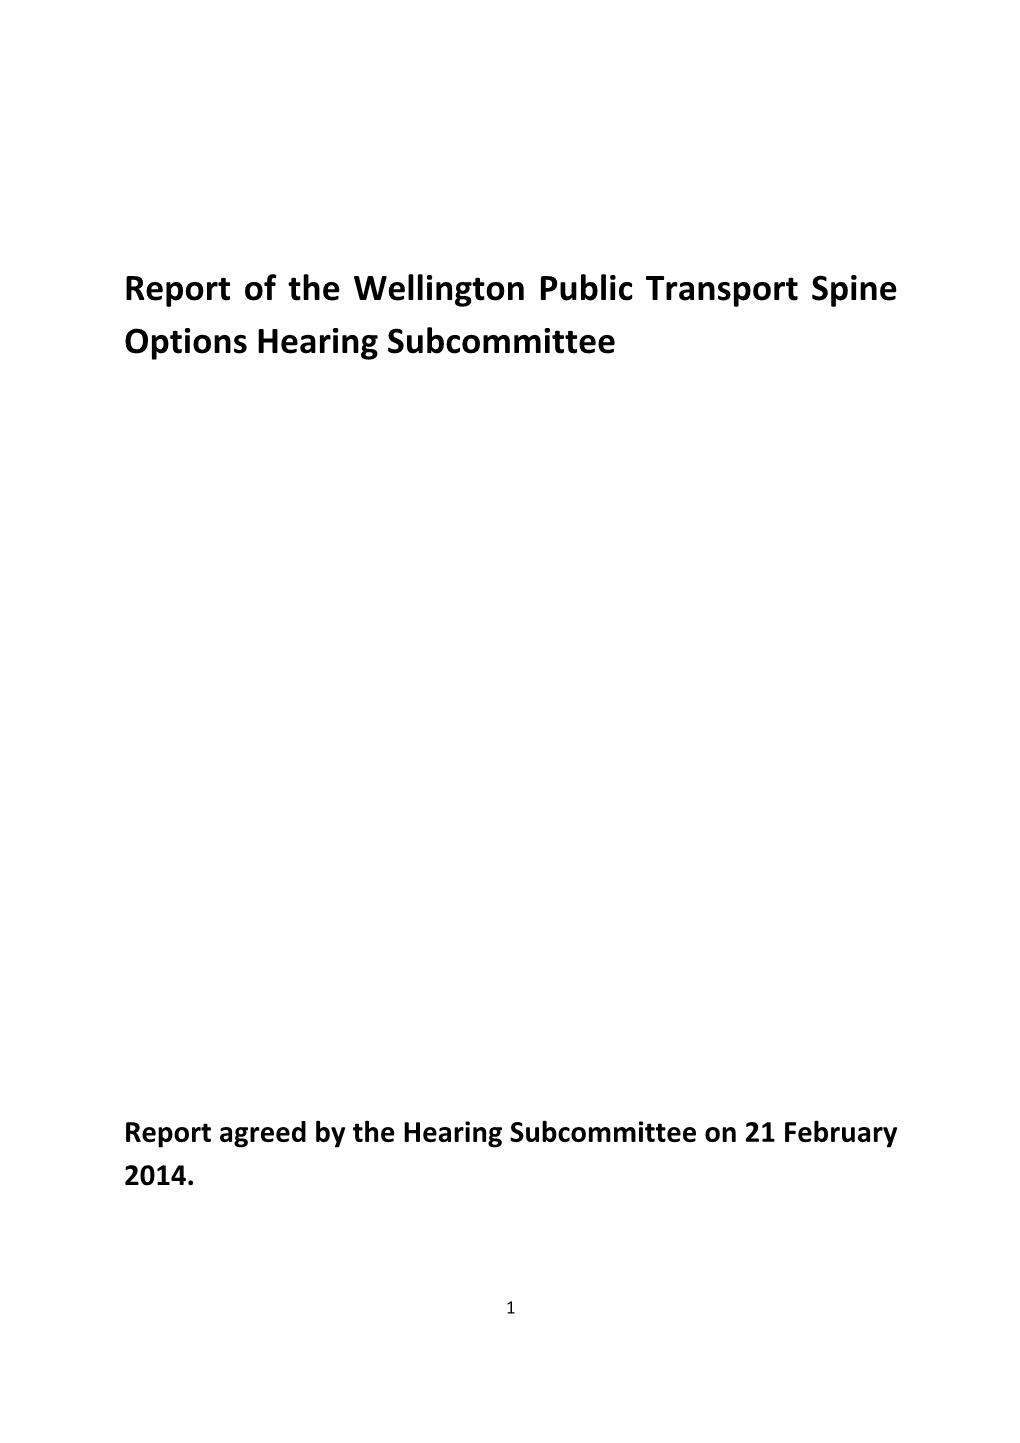 Report of the Wellington Public Transport Spine Options Hearing Subcommittee